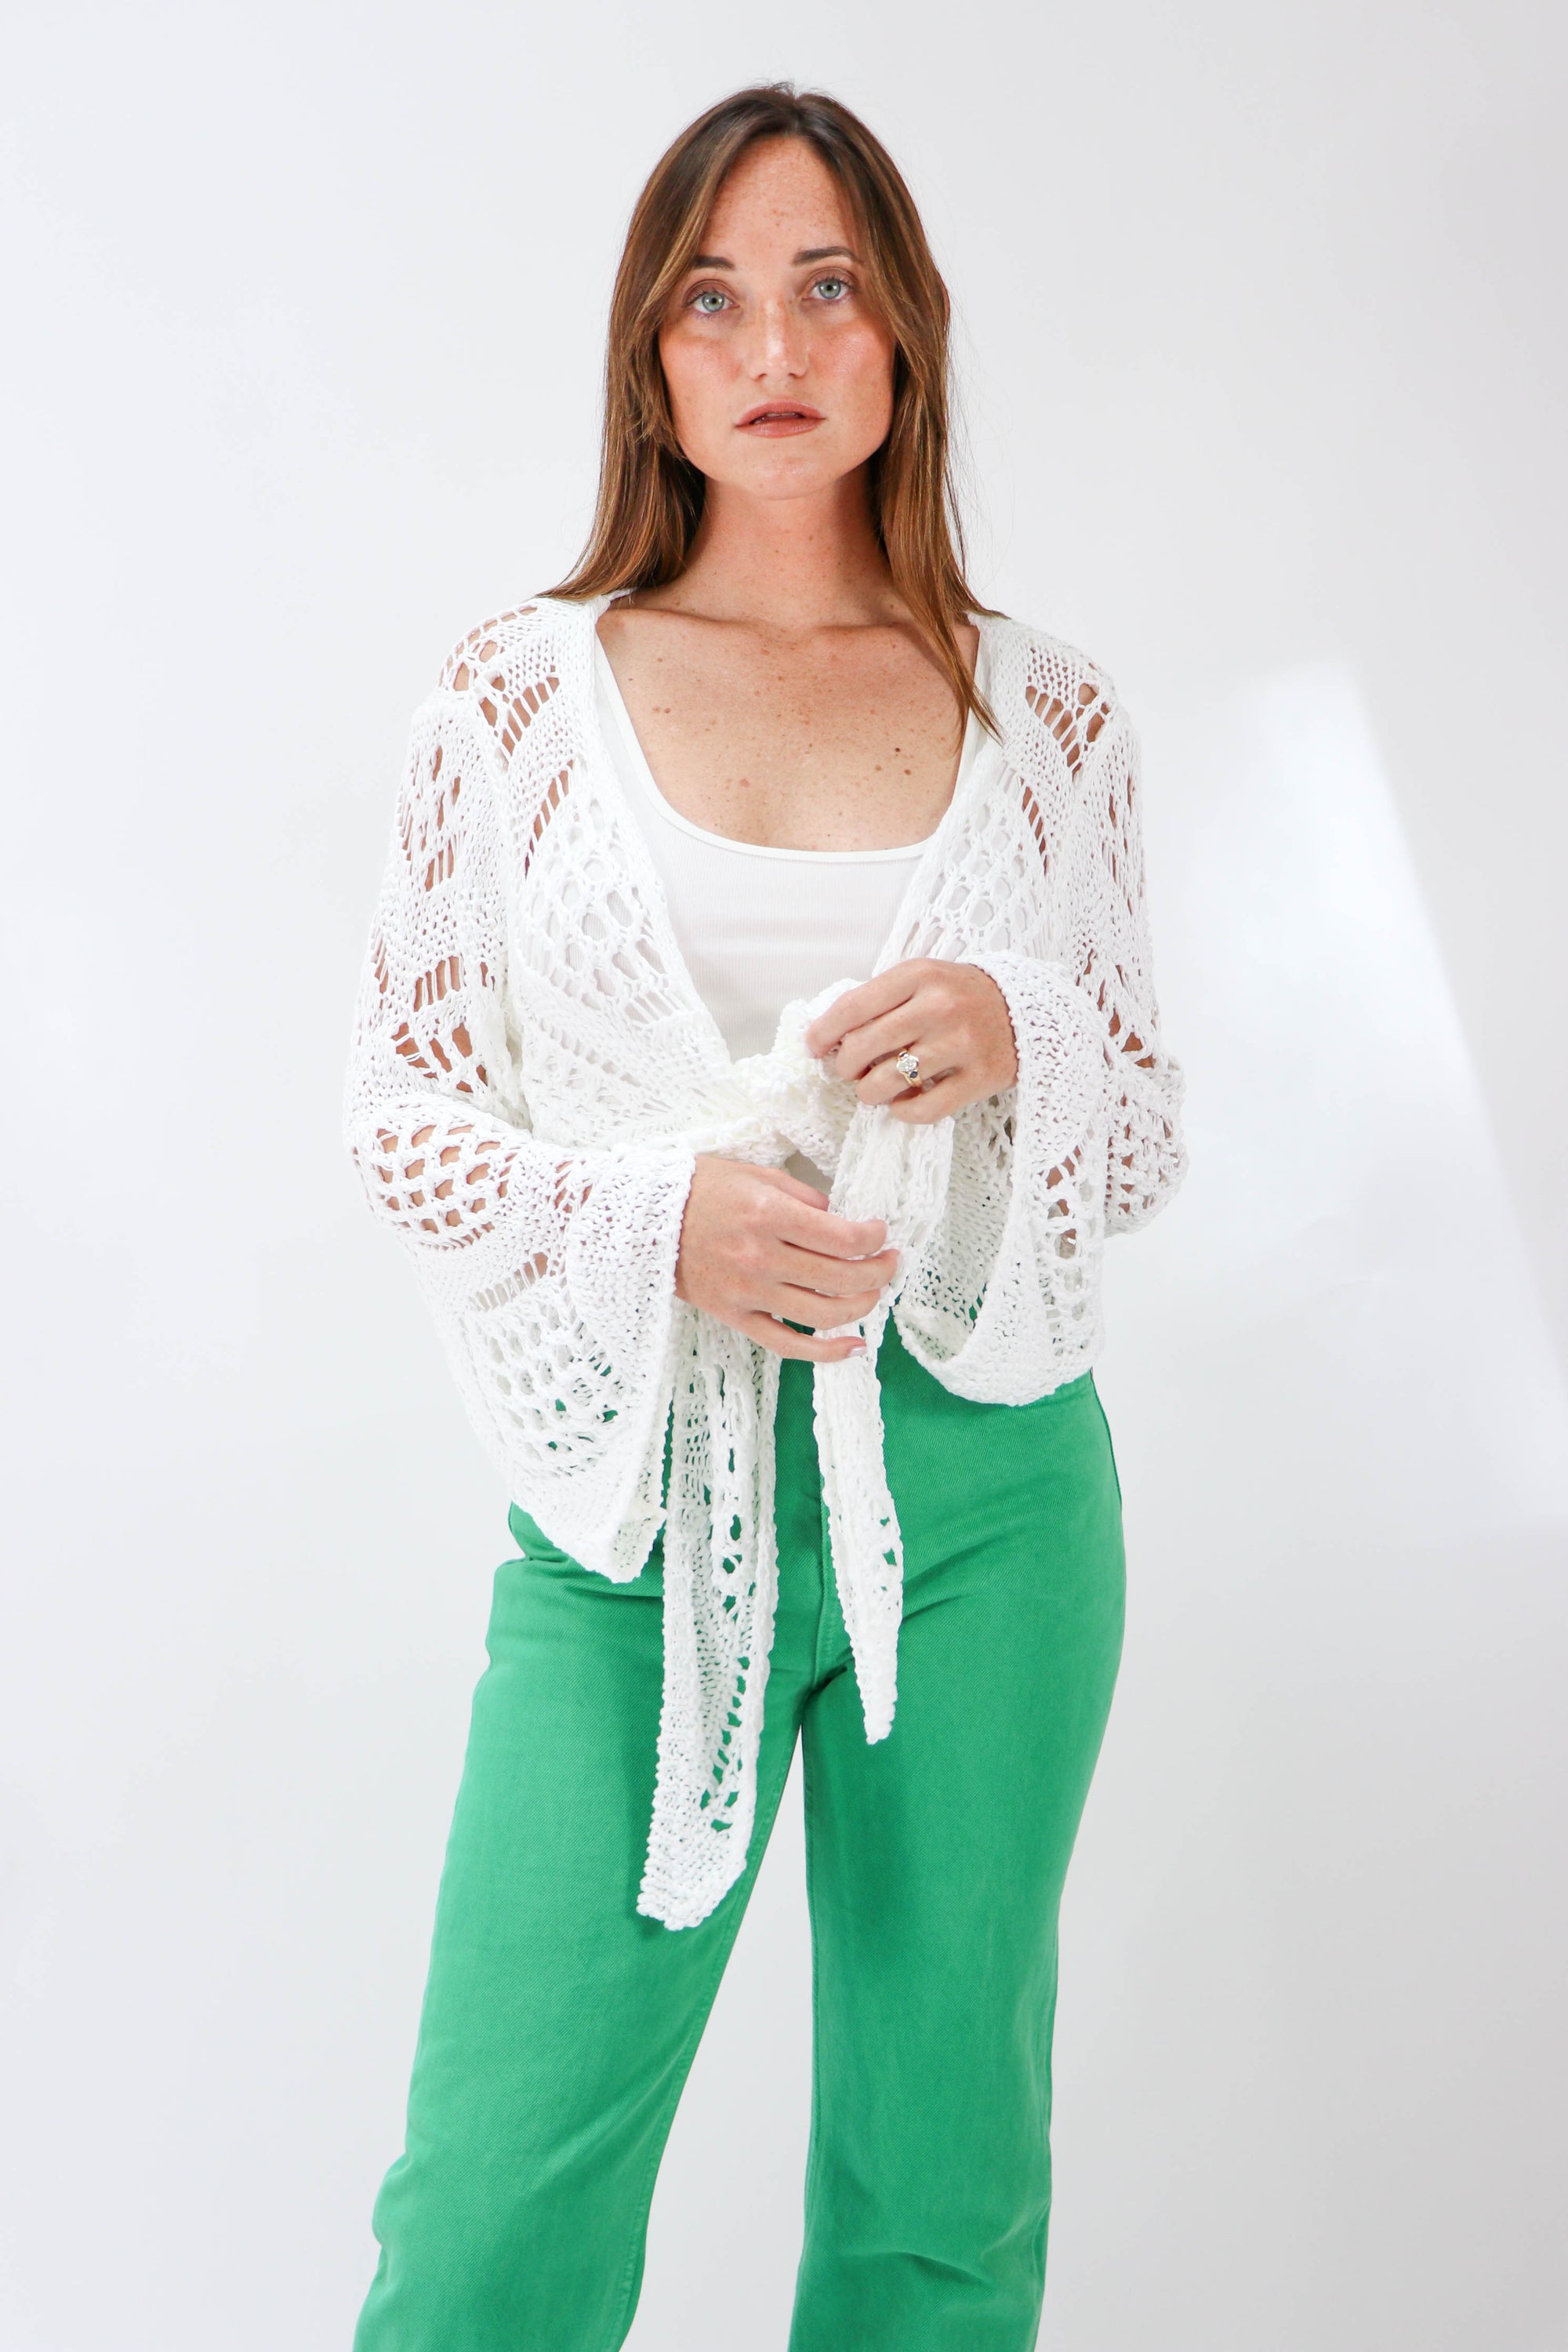 Crochet Cover Up Top | Sweetest Stitch Women's Boutique